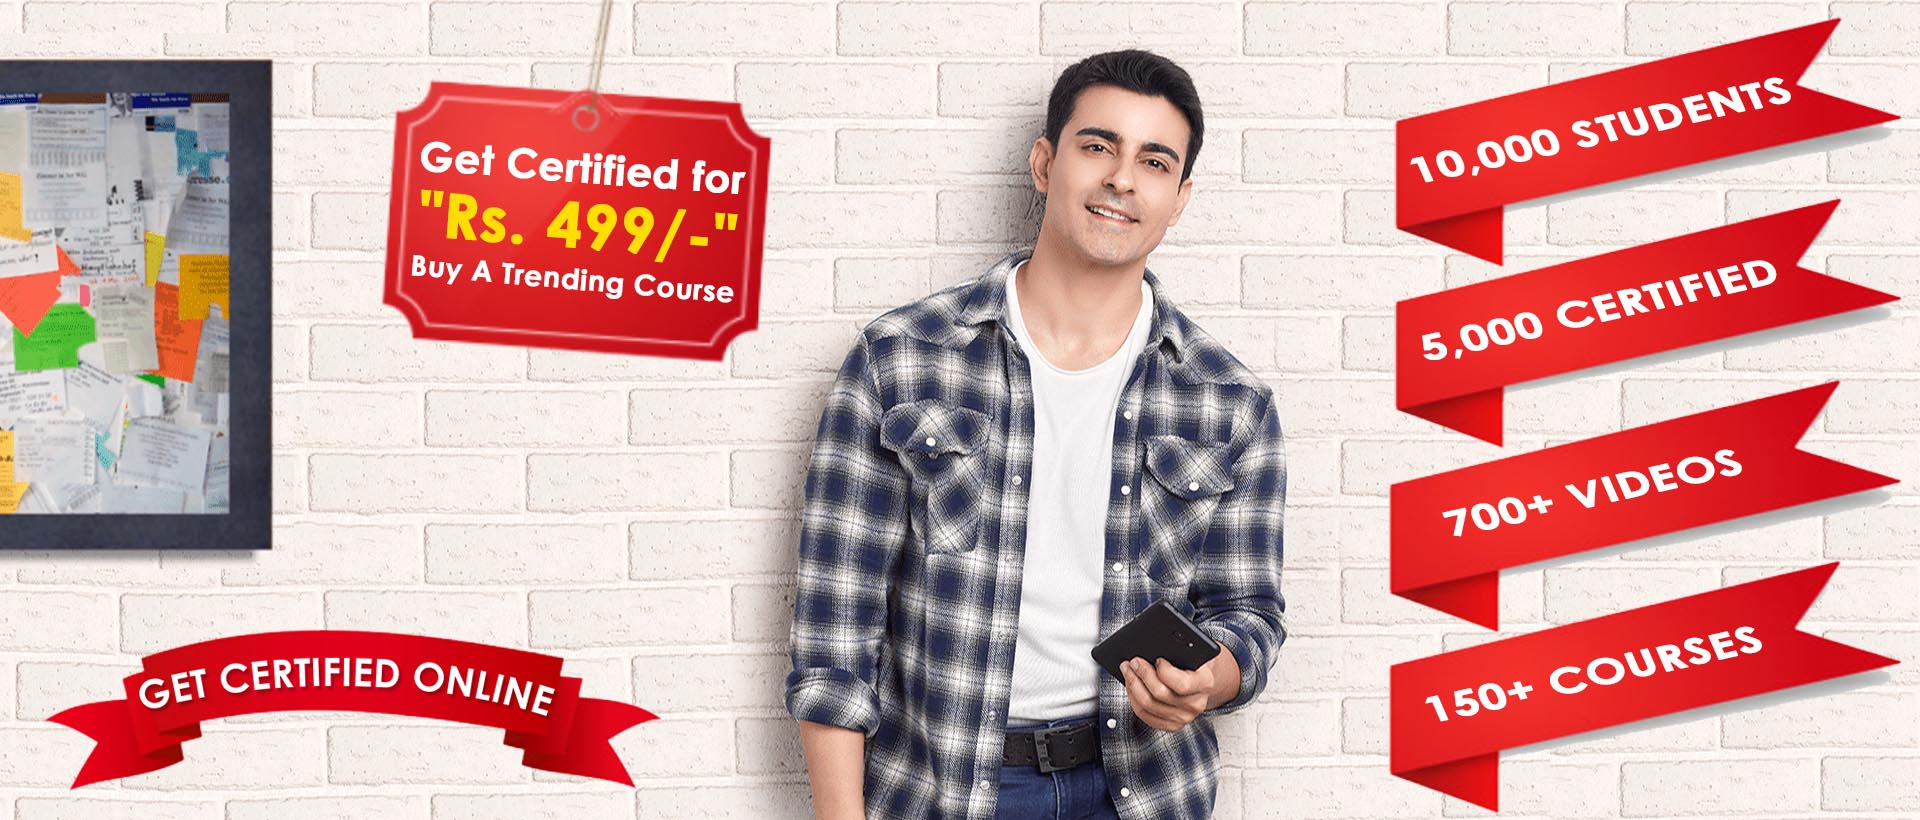 Government Recognised Approved Online Certificate Courses in India for Free Best Popular Trending Short Term Job Oriented Certification | GYAAN.COM | Gautam Rode